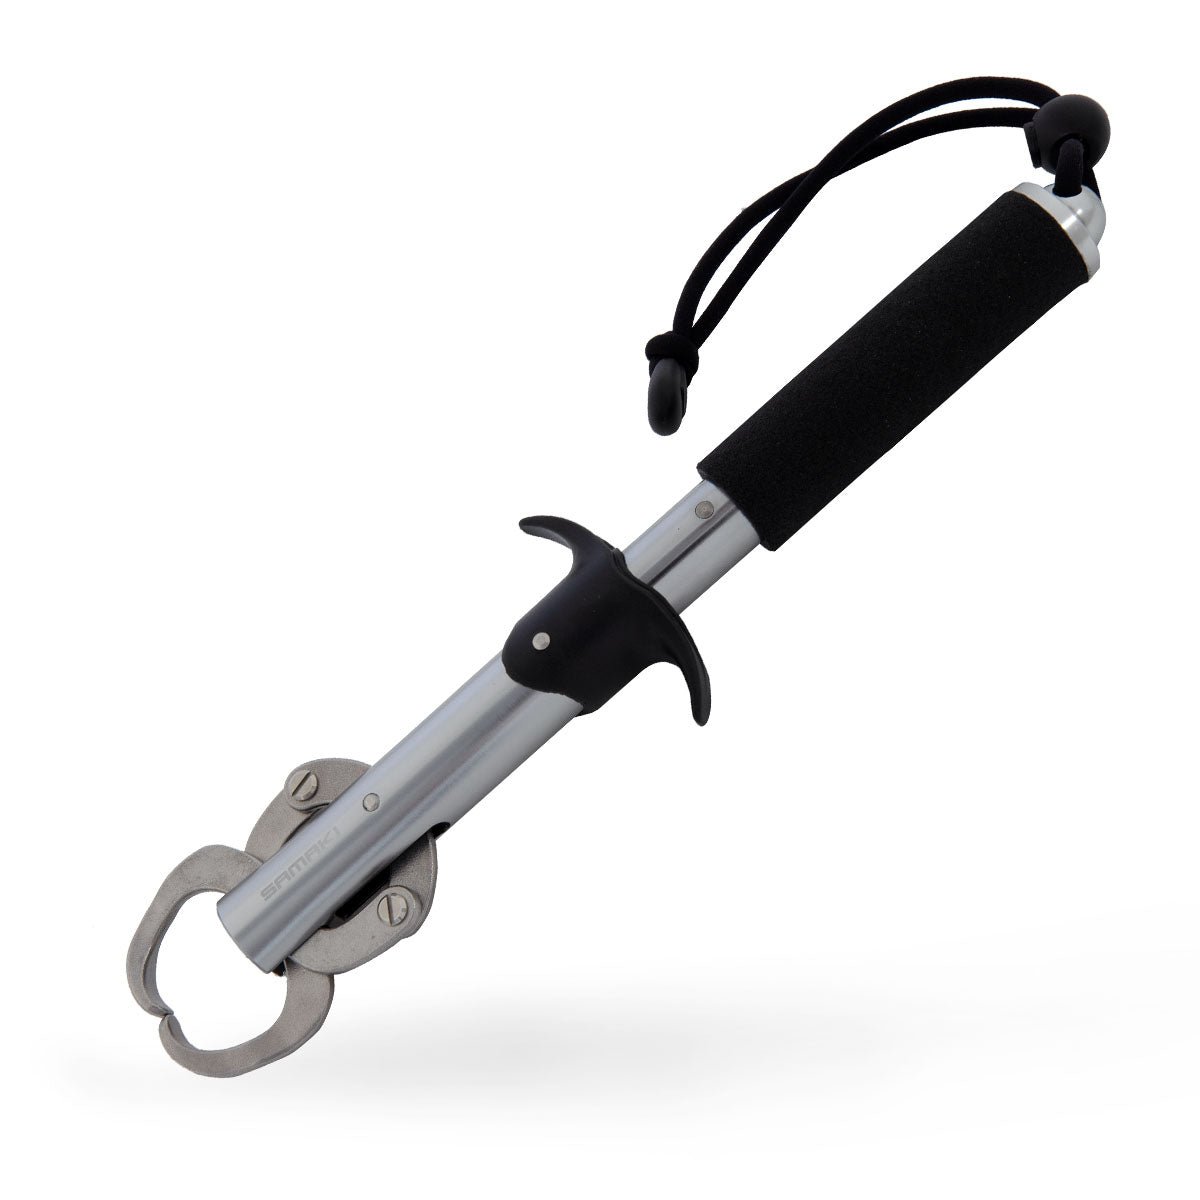 Portable Stainless Steel Fishing Gripper Fish Lip Grip - Brilliant Promos -  Be Brilliant!